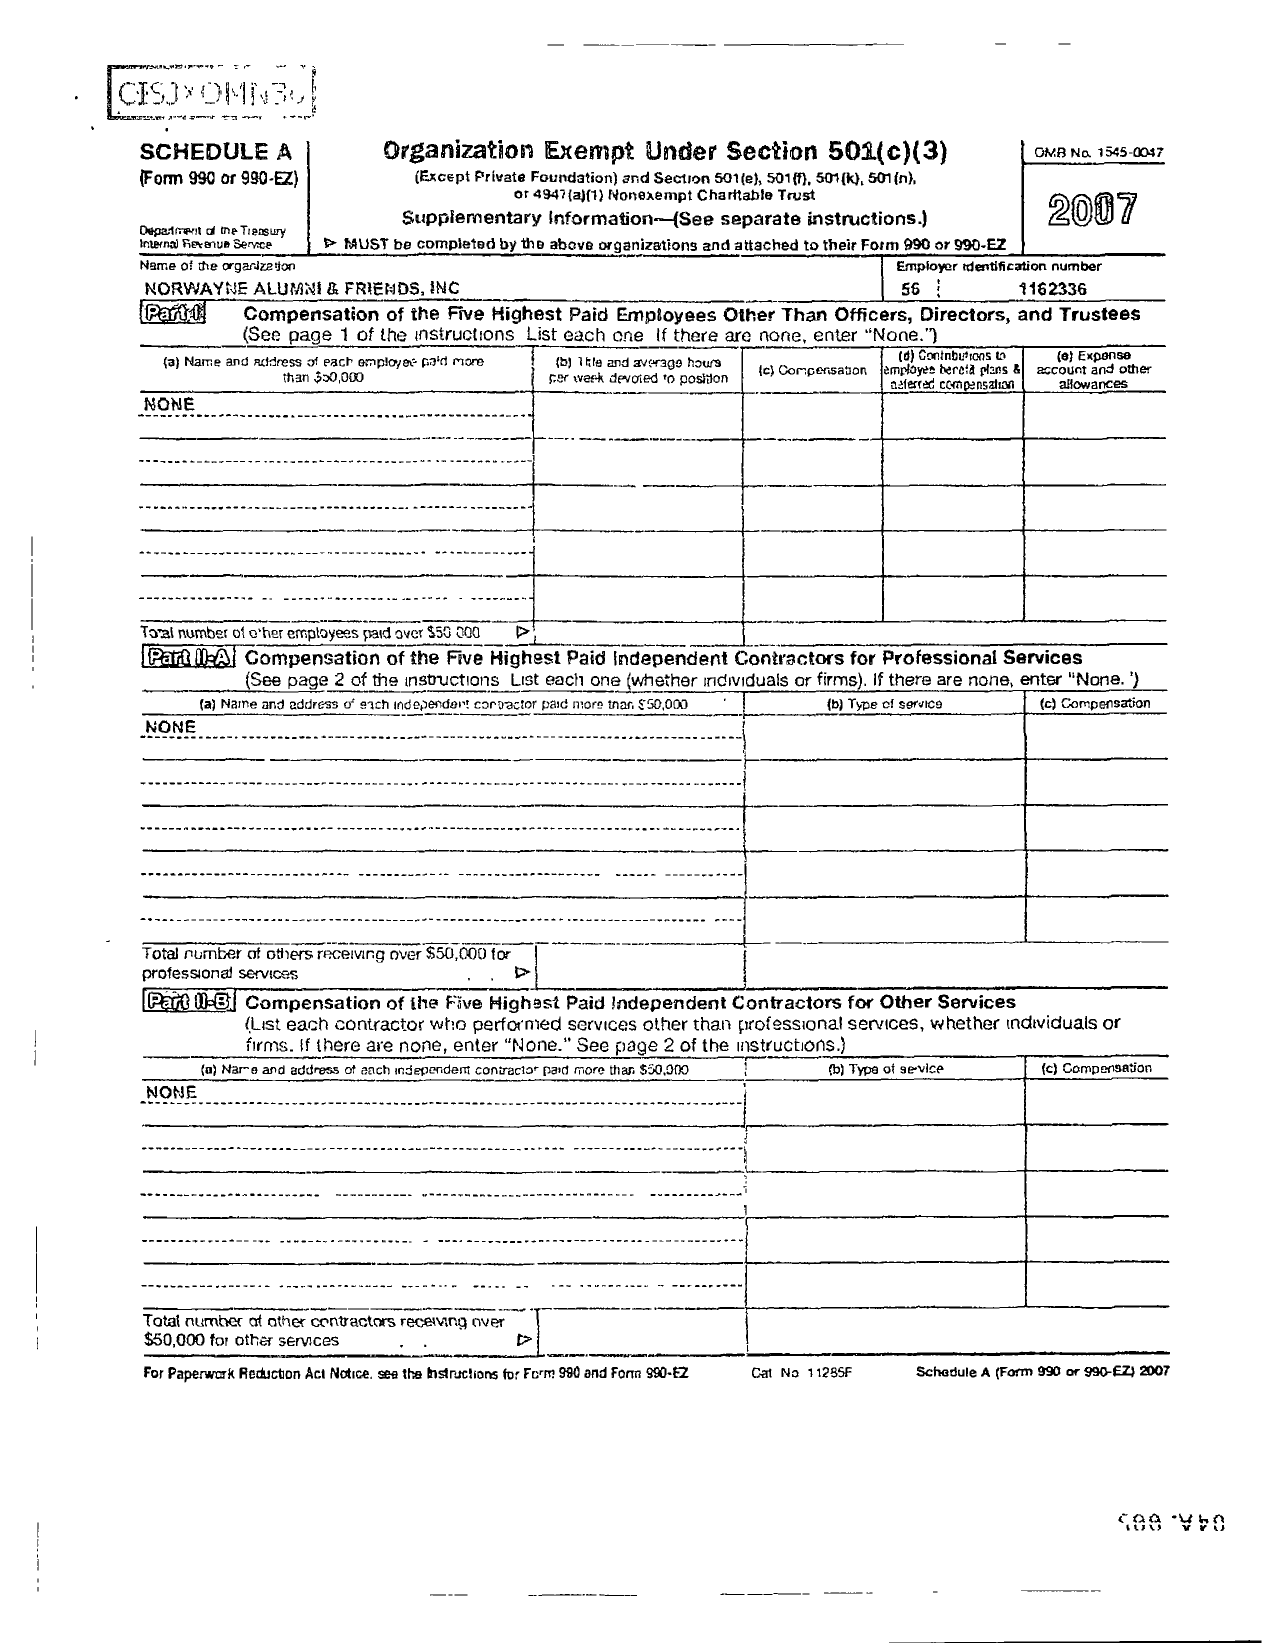 Image of first page of 2007 Form 990ER for Norwayne Alumni and Friends Incorporated